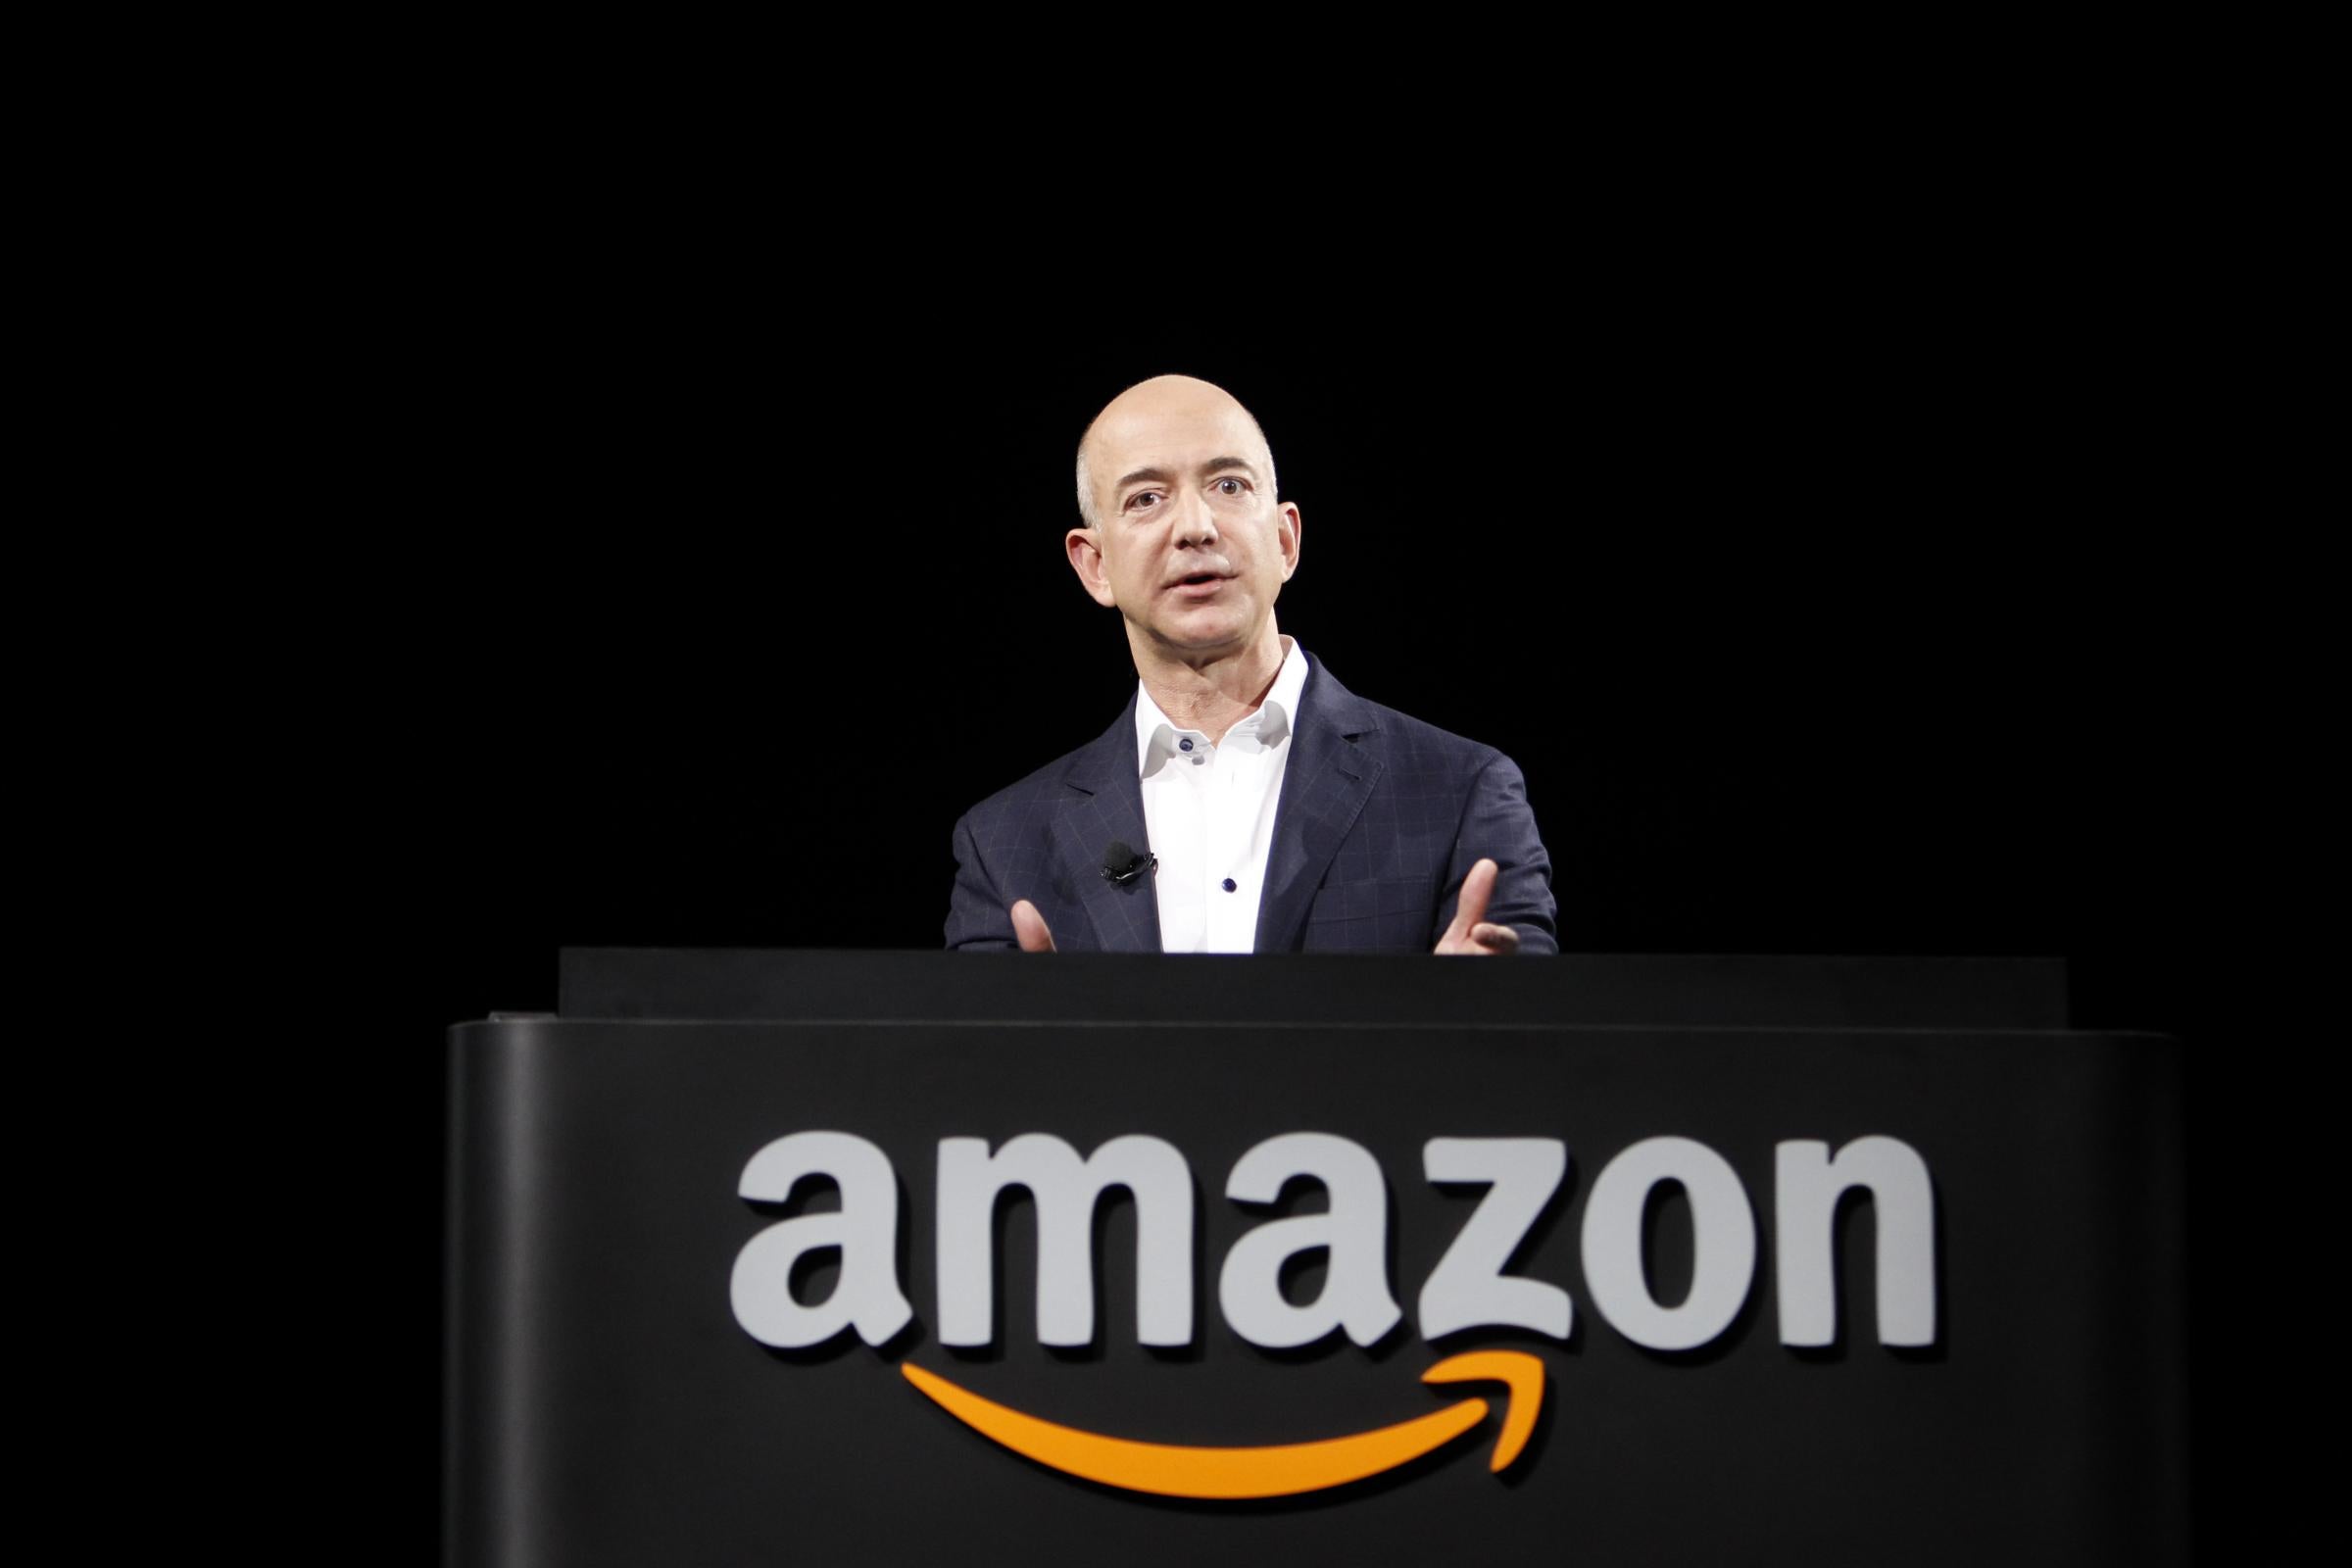 Music & video streaming, ecommerce, food delivery: Amazon shows it will compete with anyone - including itself